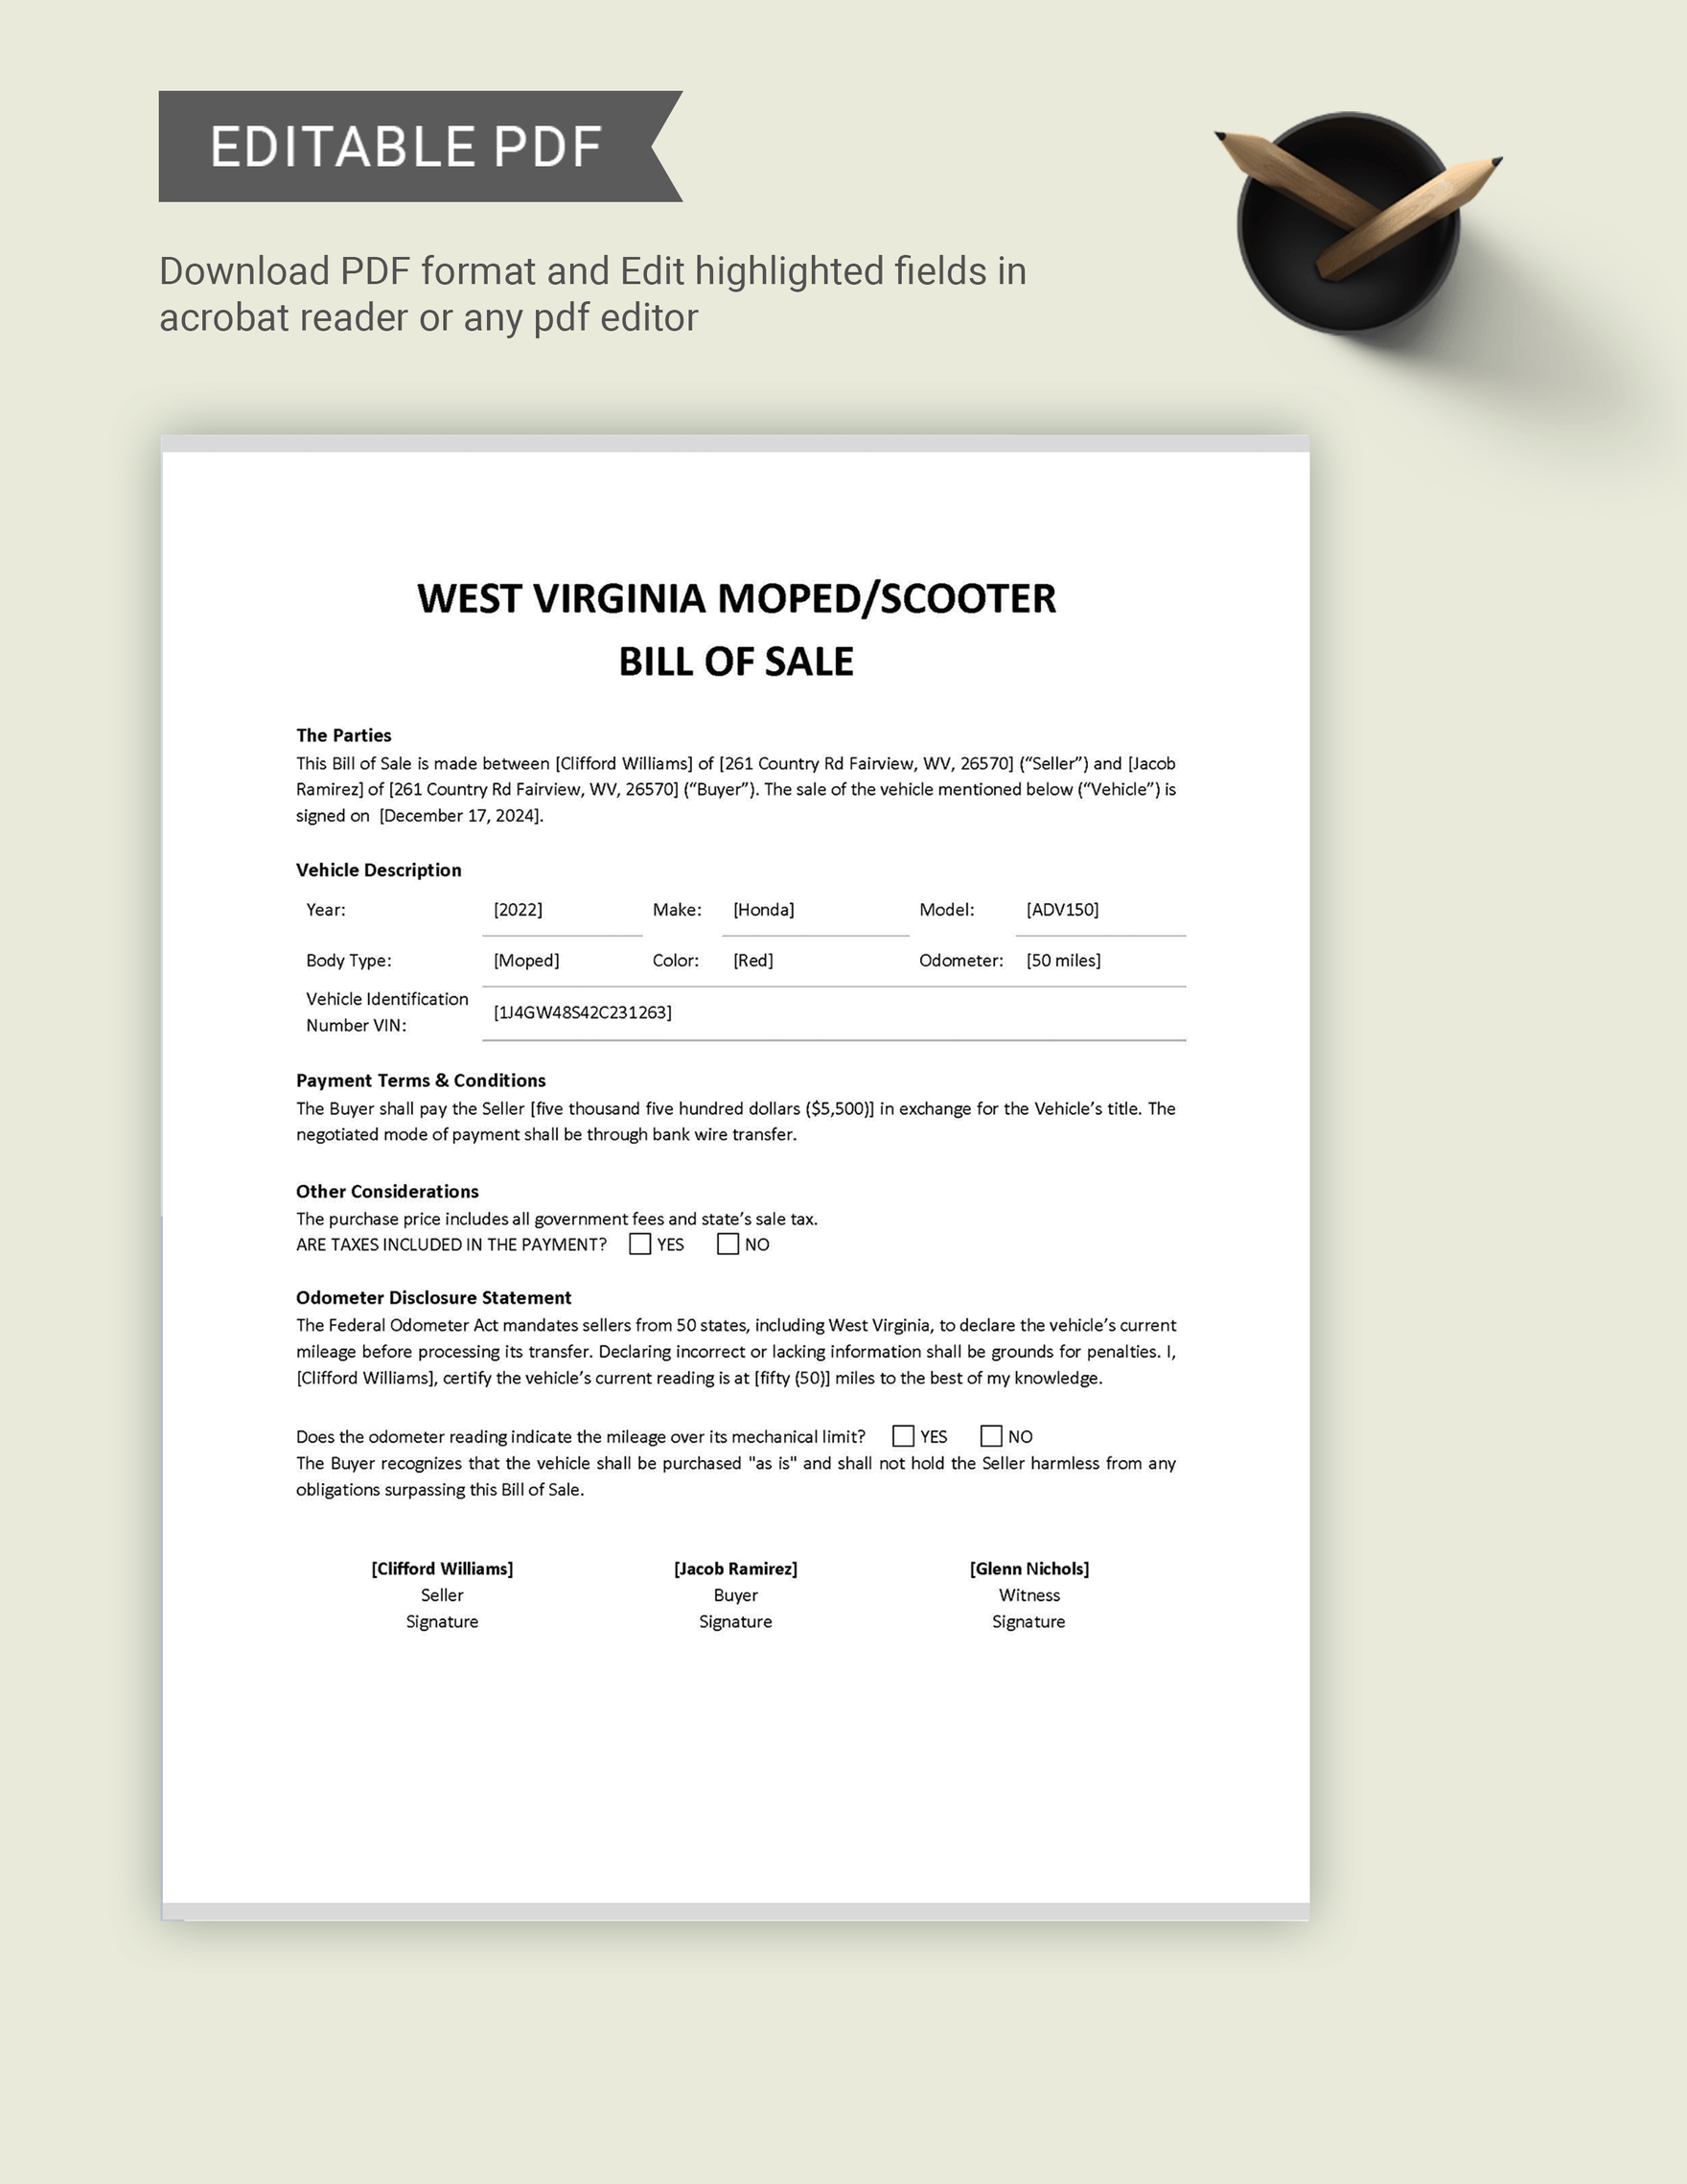 West Virginia Moped / Scooter Bill of Sale Template